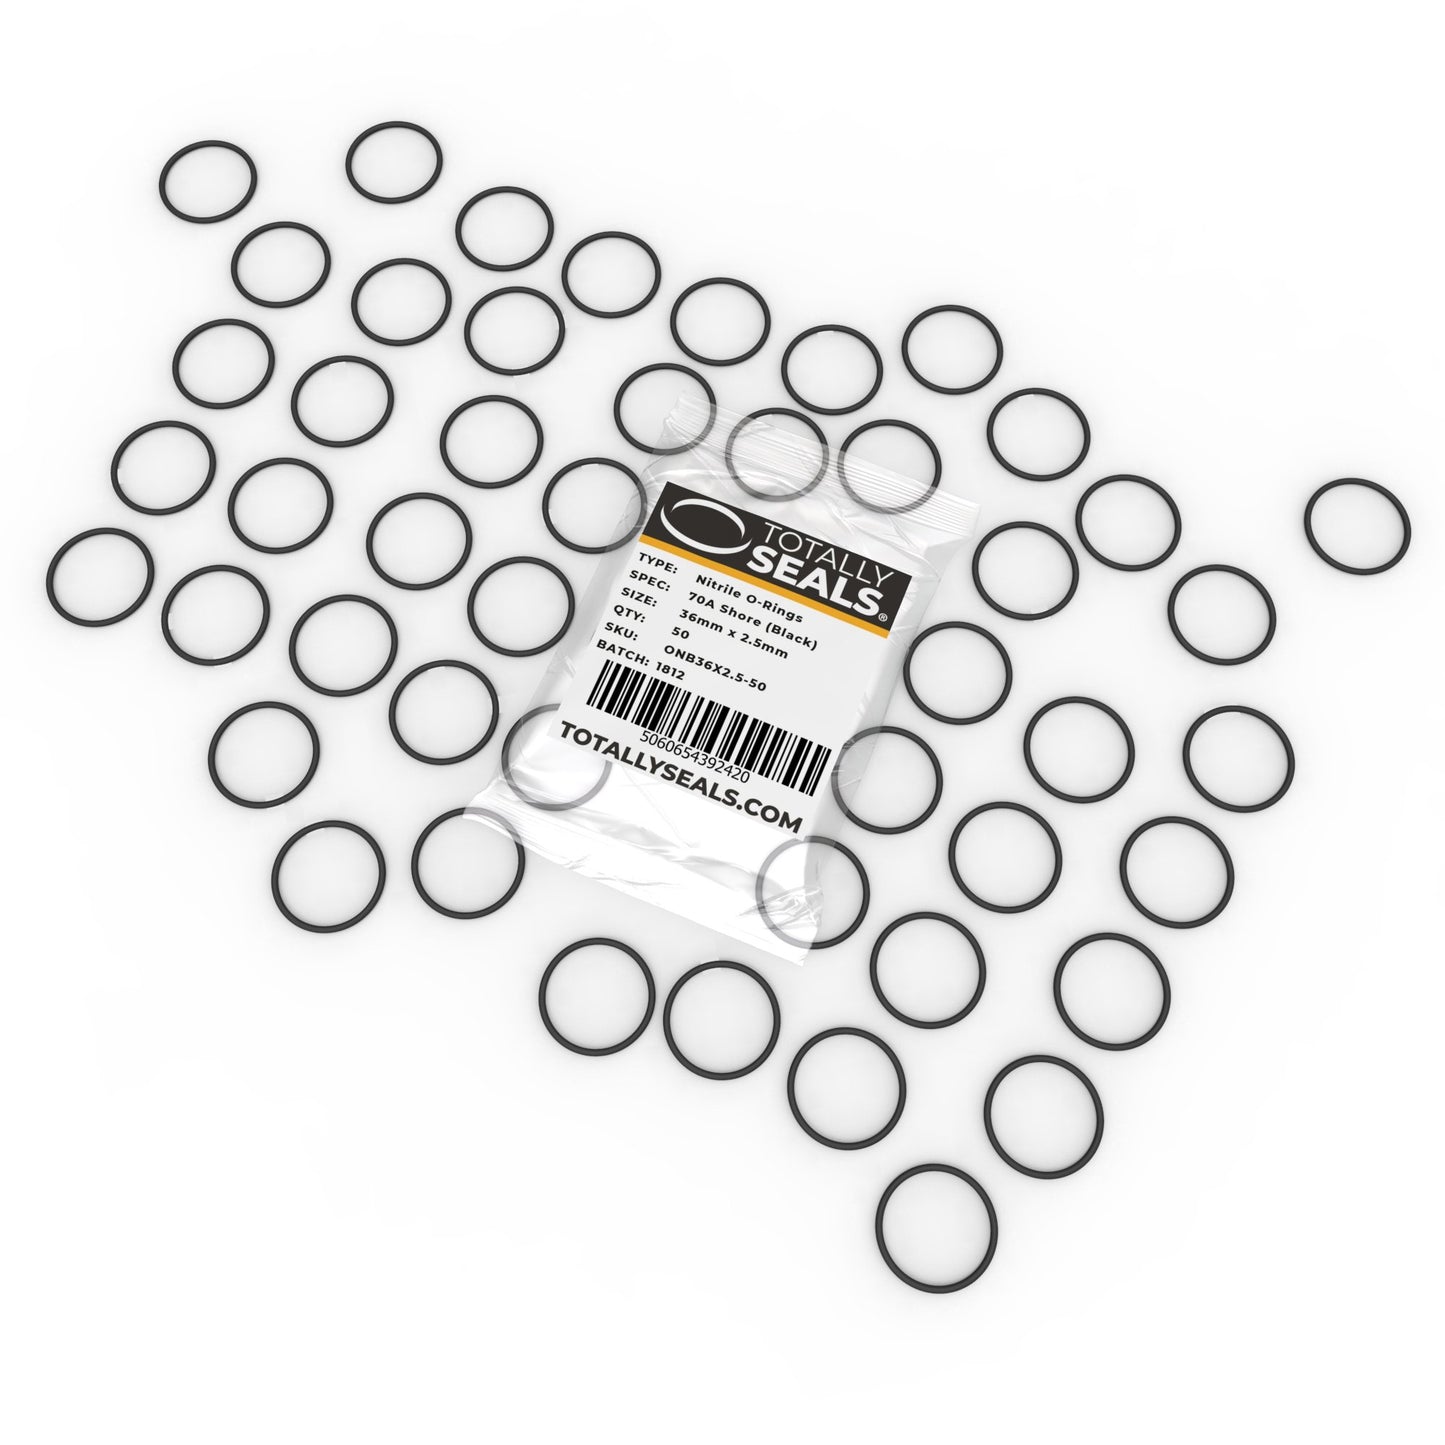 36mm x 2.5mm (41mm OD) Nitrile O-Rings - Totally Seals®